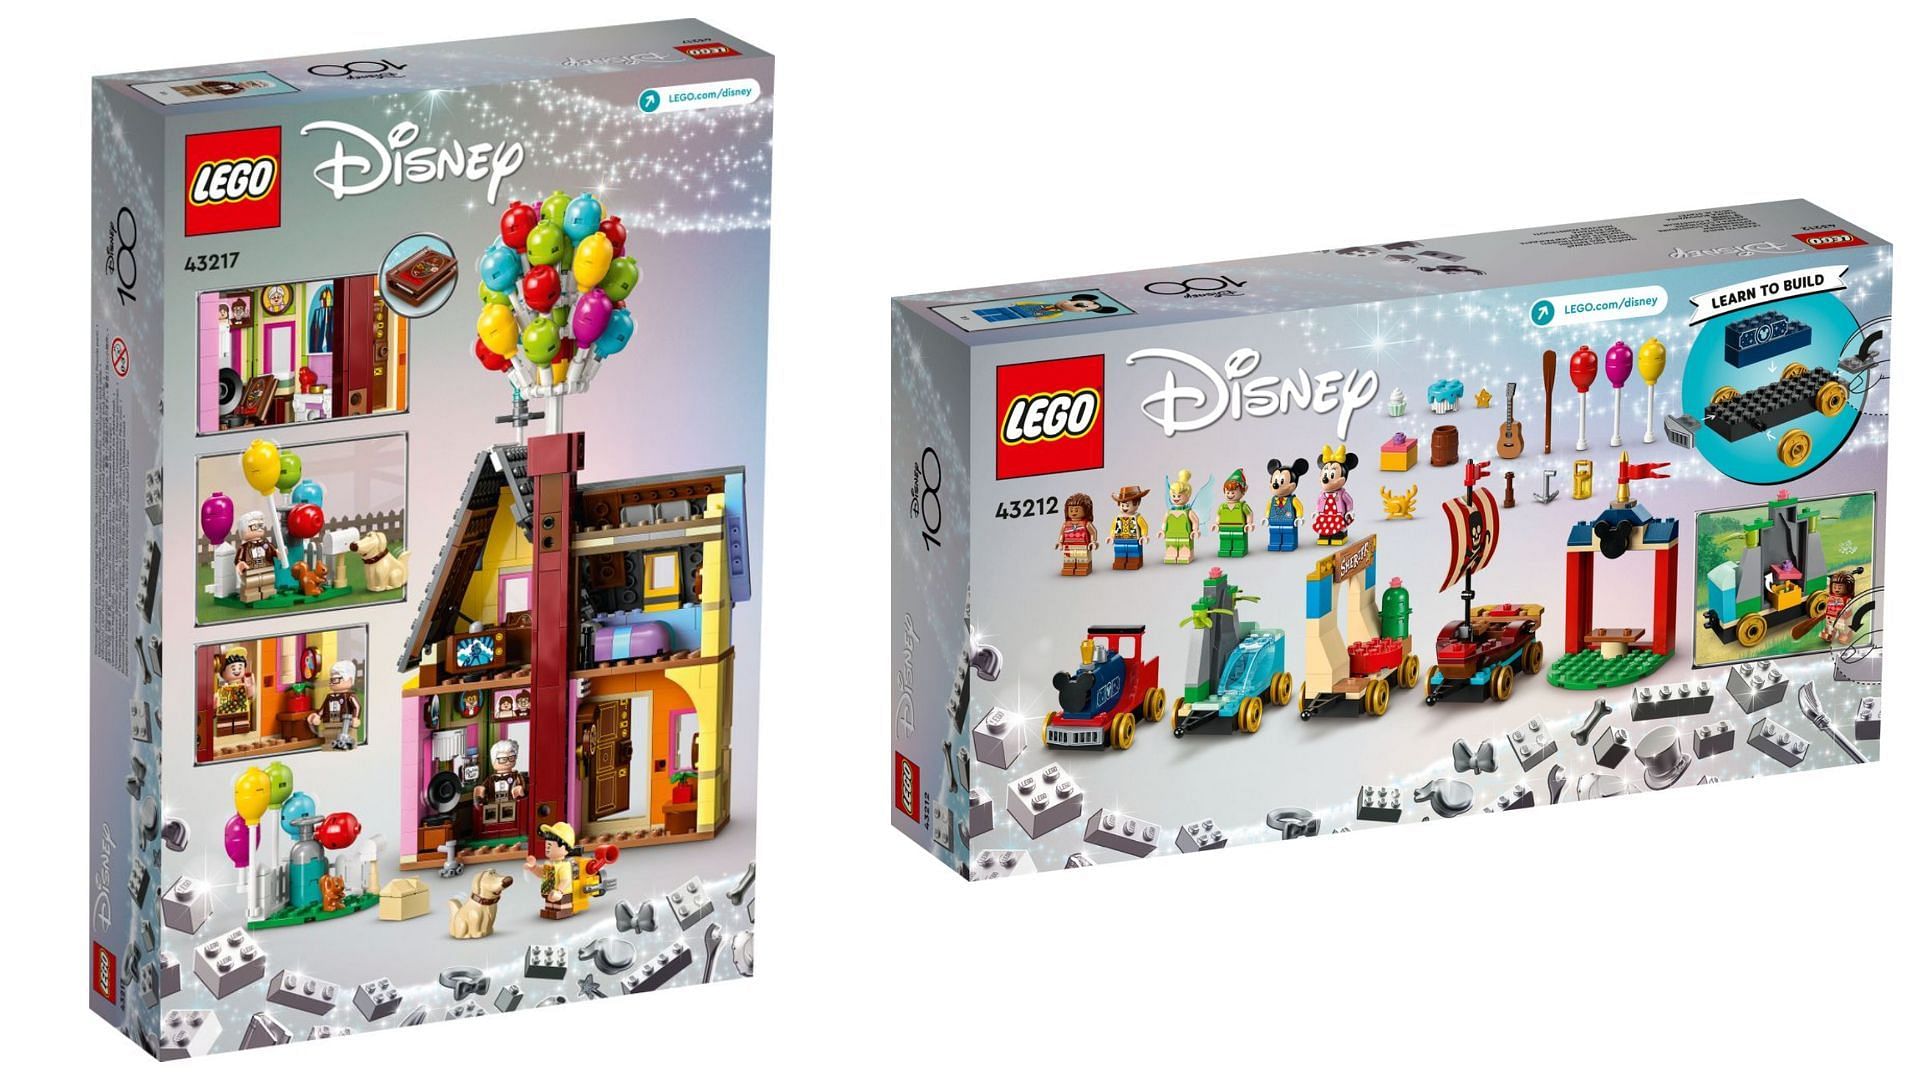 The new Disney 100 LEGO set is expected to launch nationwide on April 1, 2023 (Image via Lego)